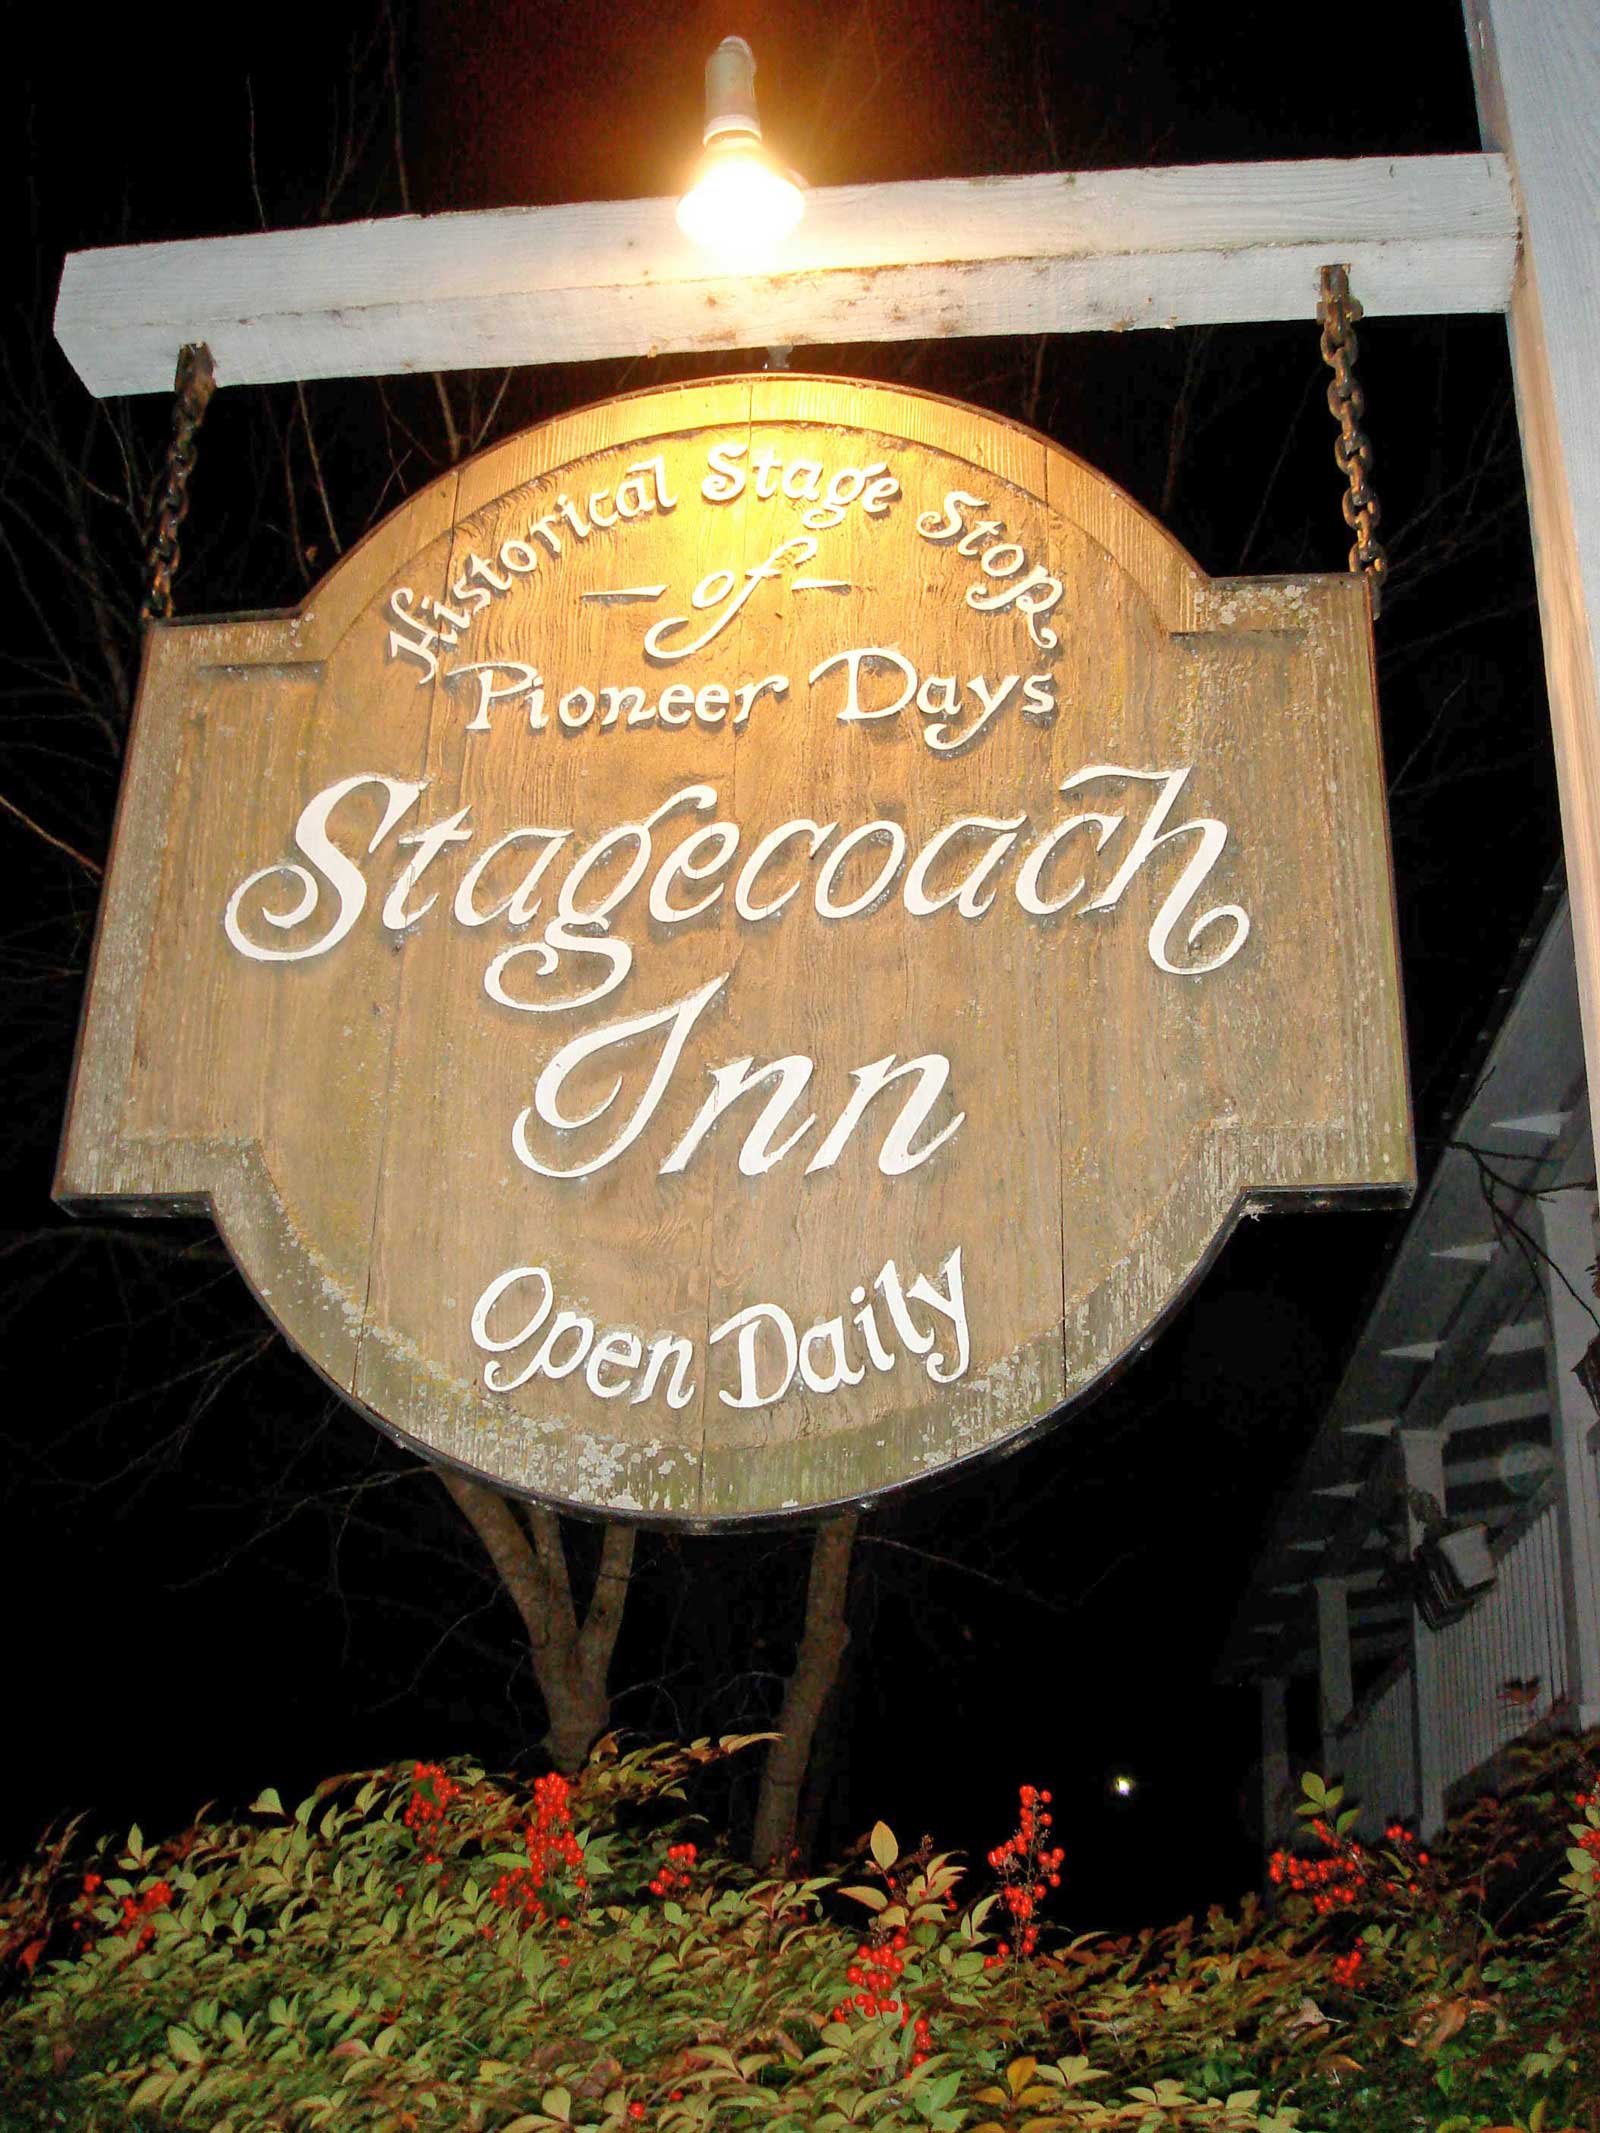 The sign for Stagecoach Inn